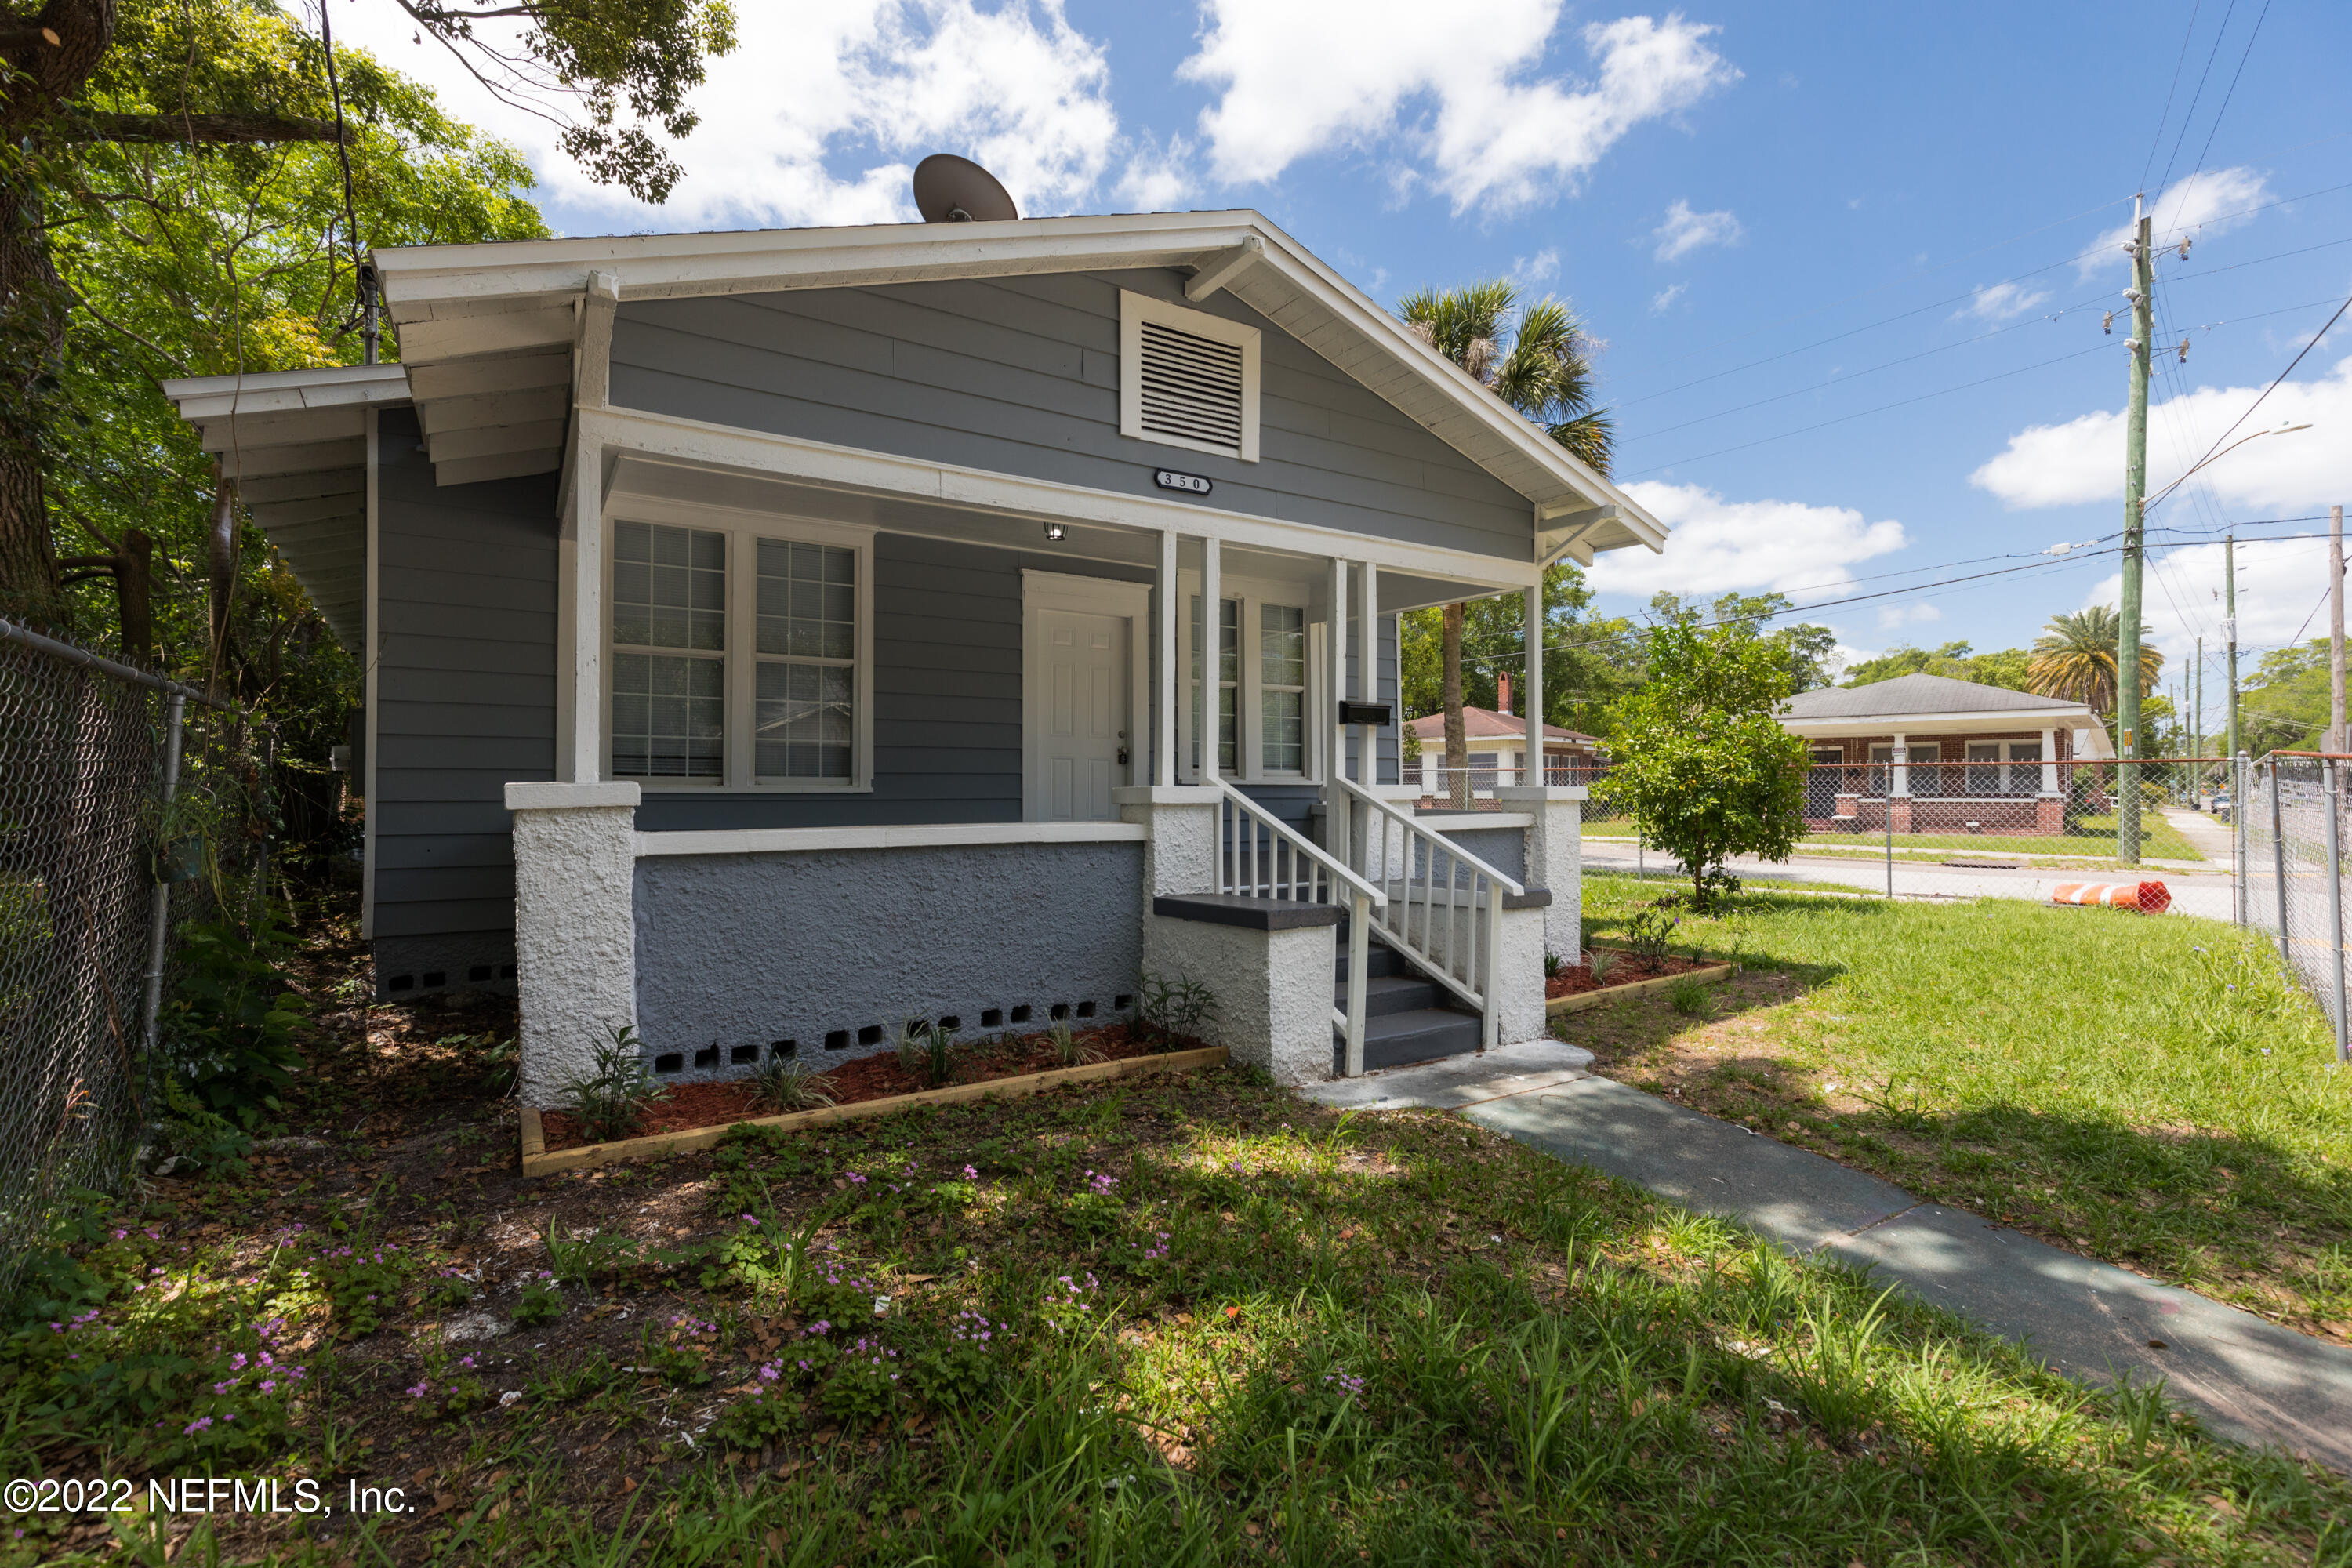 Jacksonville, FL home for sale located at 350 W 25TH Street, Jacksonville, FL 32206